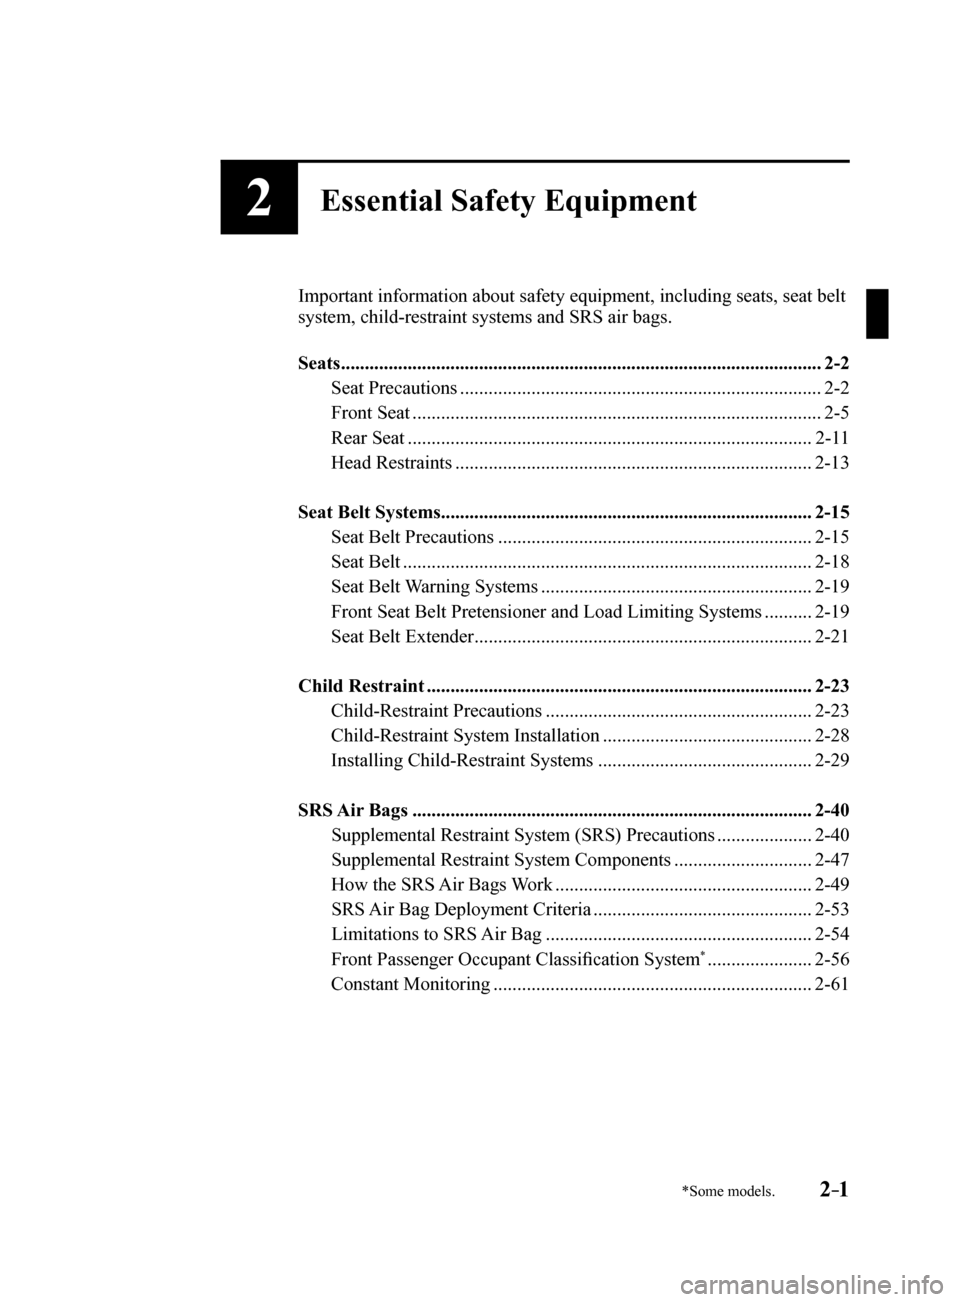 MAZDA MODEL 6 2017   (in English) User Guide 2–1*Some models.
2Essential Safety Equipment
Important information about safety equipment, including seats, seat belt 
system, child-restraint systems and SRS air bags.
Seats .......................